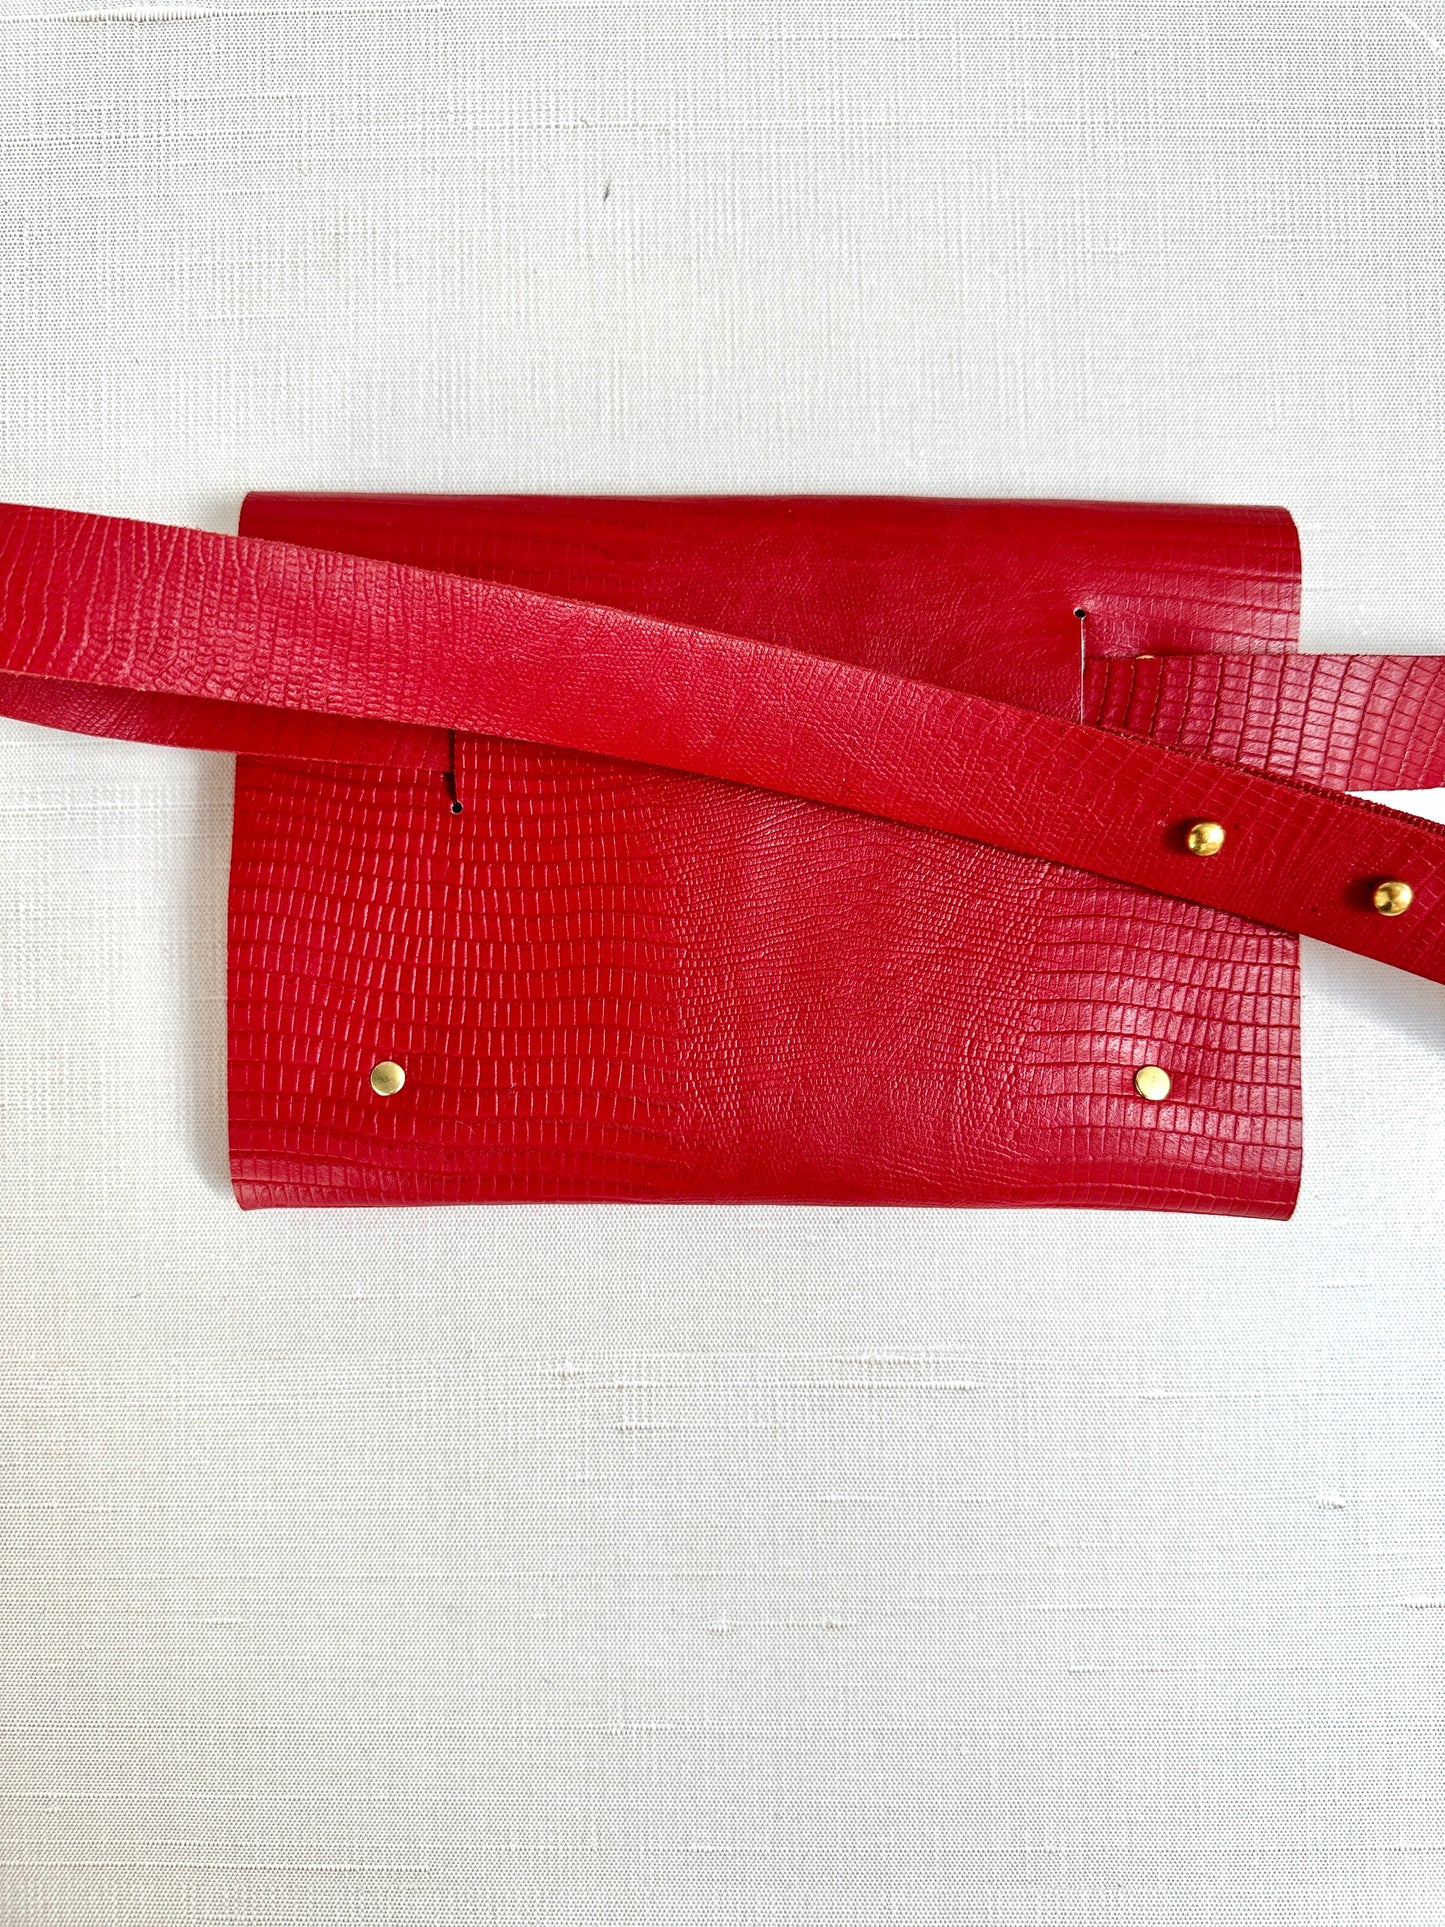 Red Leather Fanny Pack